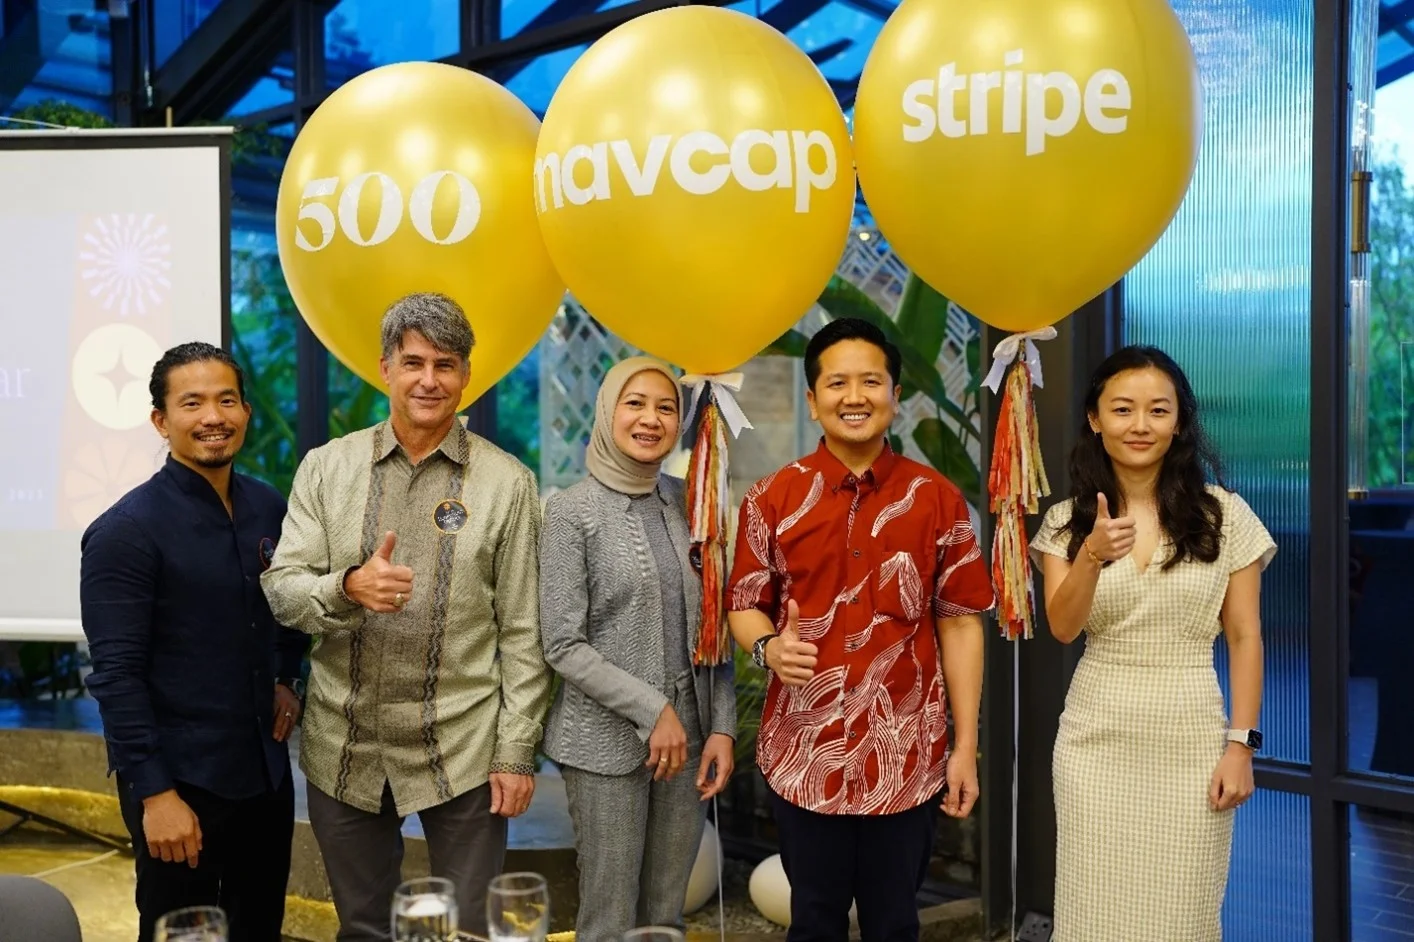 MAVCAP’s CEO, Noor Amy Ismail alongside with (from left to right), Khailee Ng, Managing Partner of 500 global, Brian D. McFeeters, U.S. Ambasaddor to Malaysia, Datuk Arthur Joseph Kurup, Deputy Minister Of Science and Technology and Jasmine Liew, Startup Partner Lead, SEA STRIPE. 